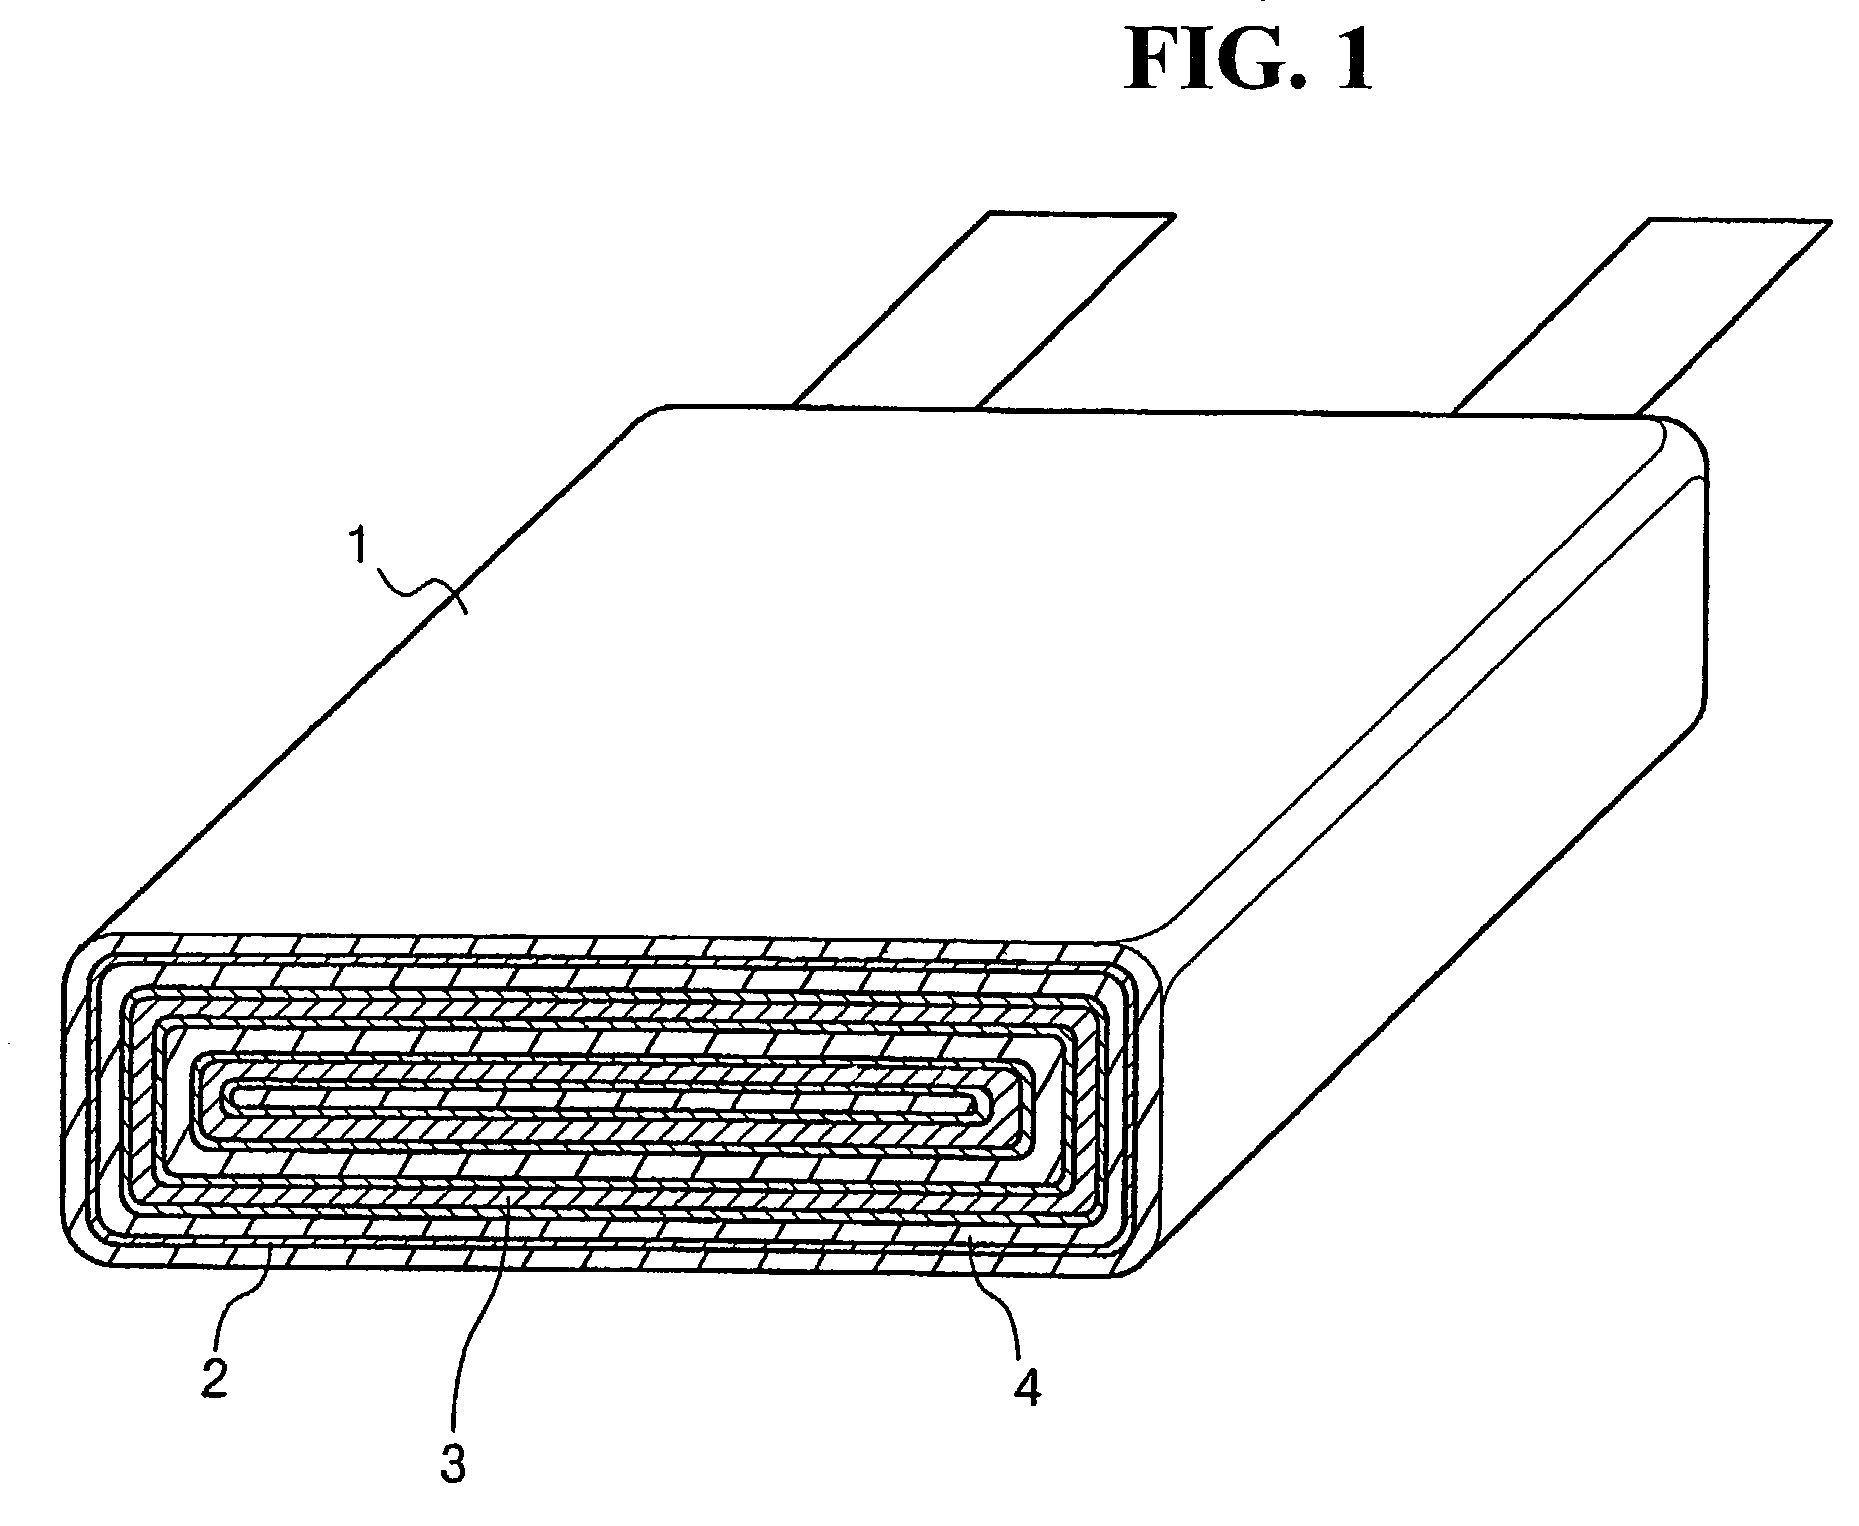 Polymer electrolyte and lithium battery employing the same